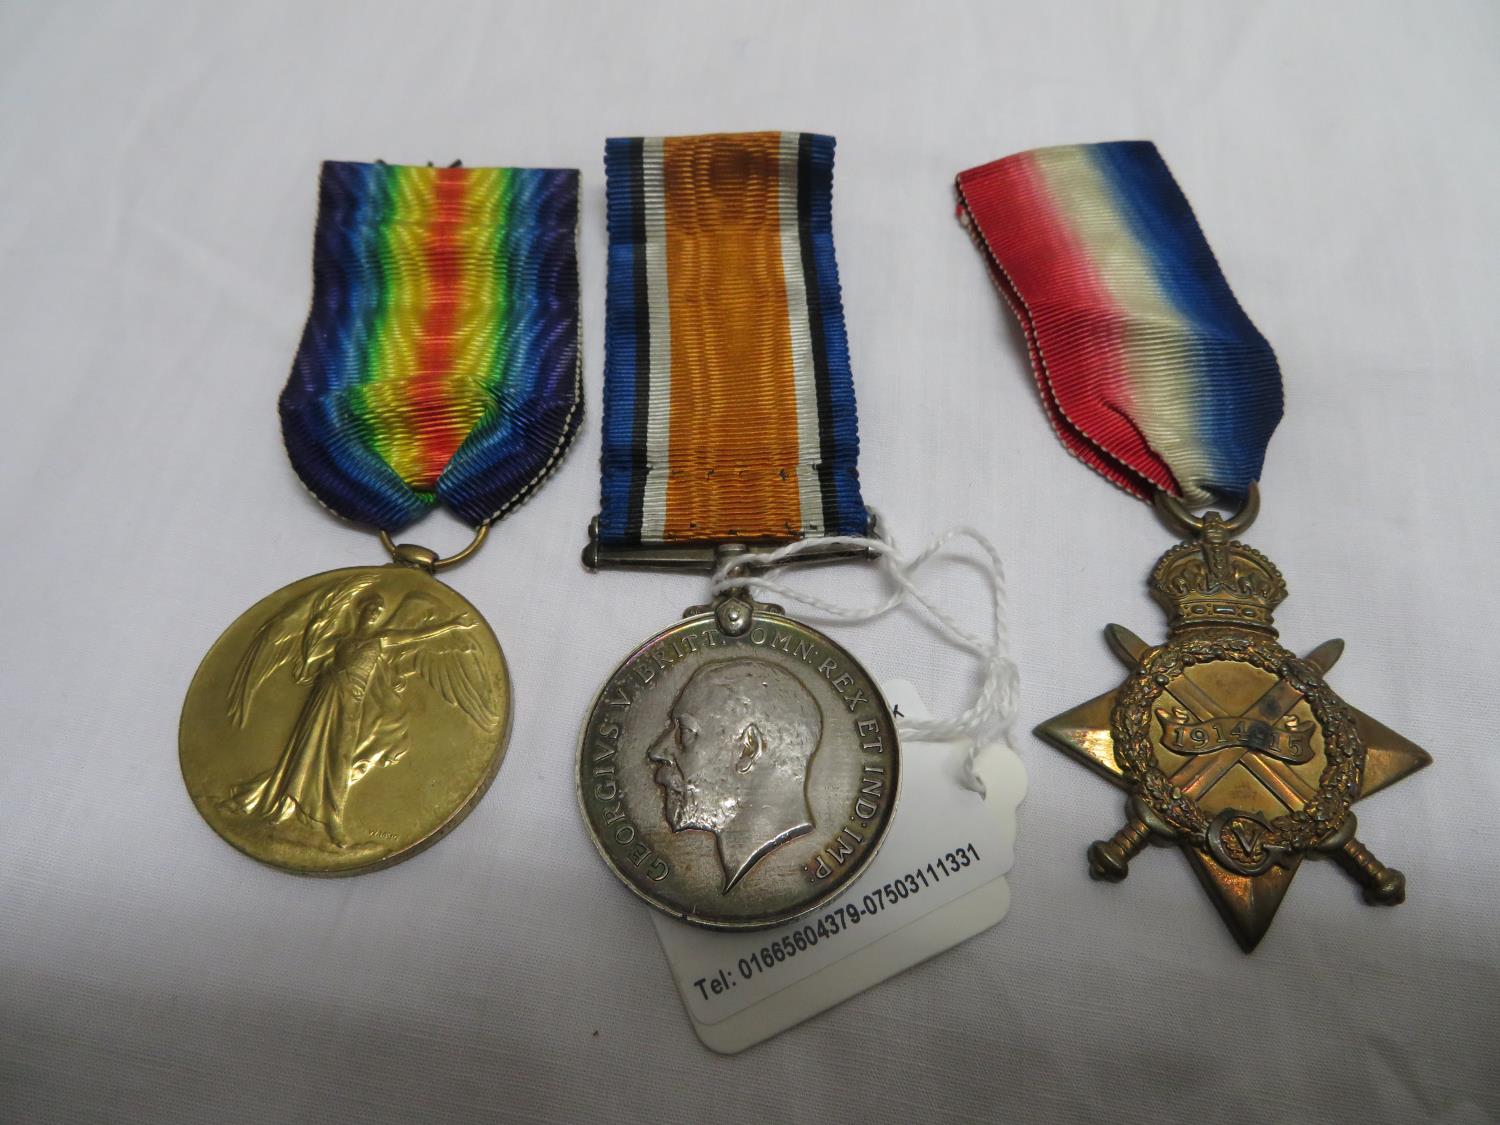 Northumberland Fusiliers WWI Trio Medal set 1086 Corporal JTW Penman